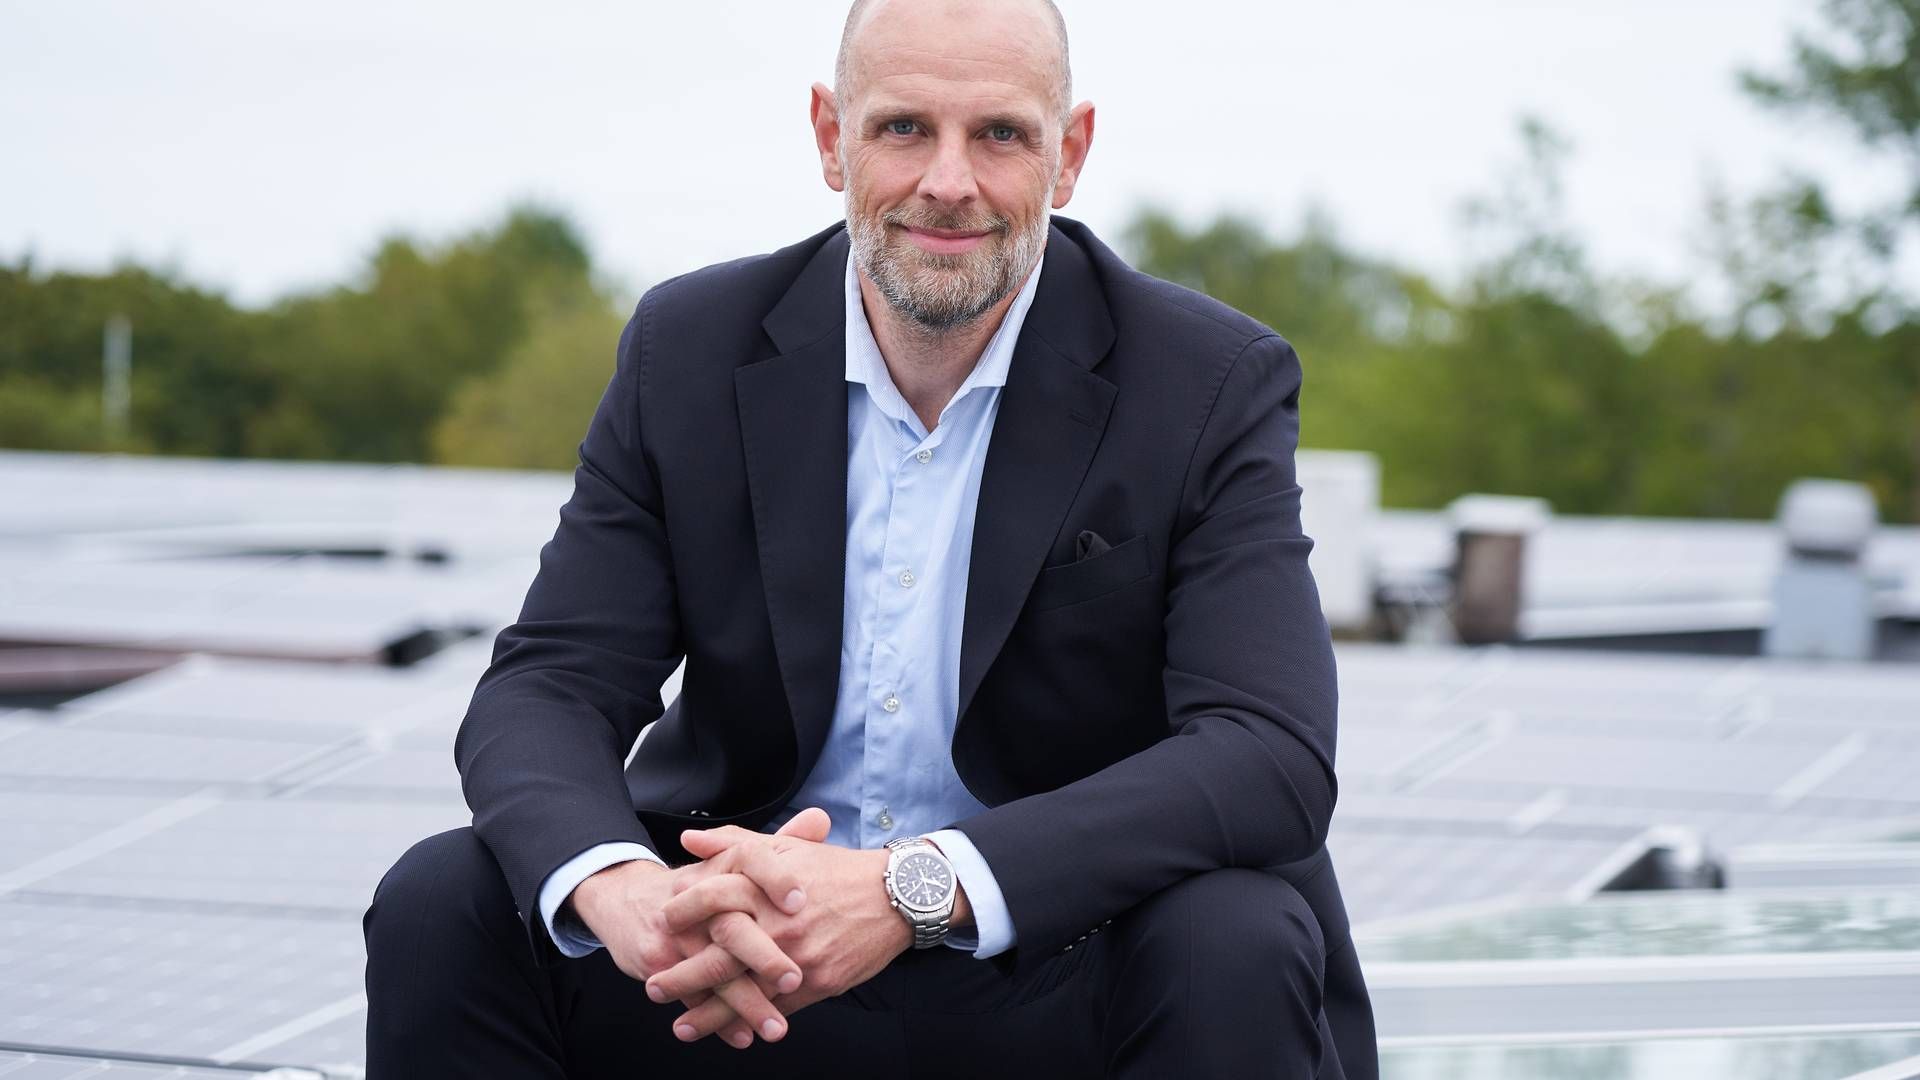 "We want to build the leading electricity trading platform in Europe, giving private investors the opportunity to invest in energy markets," says Bjørn Kunz Petersen, CEO of EIO Energy. | Photo: Eioenergy